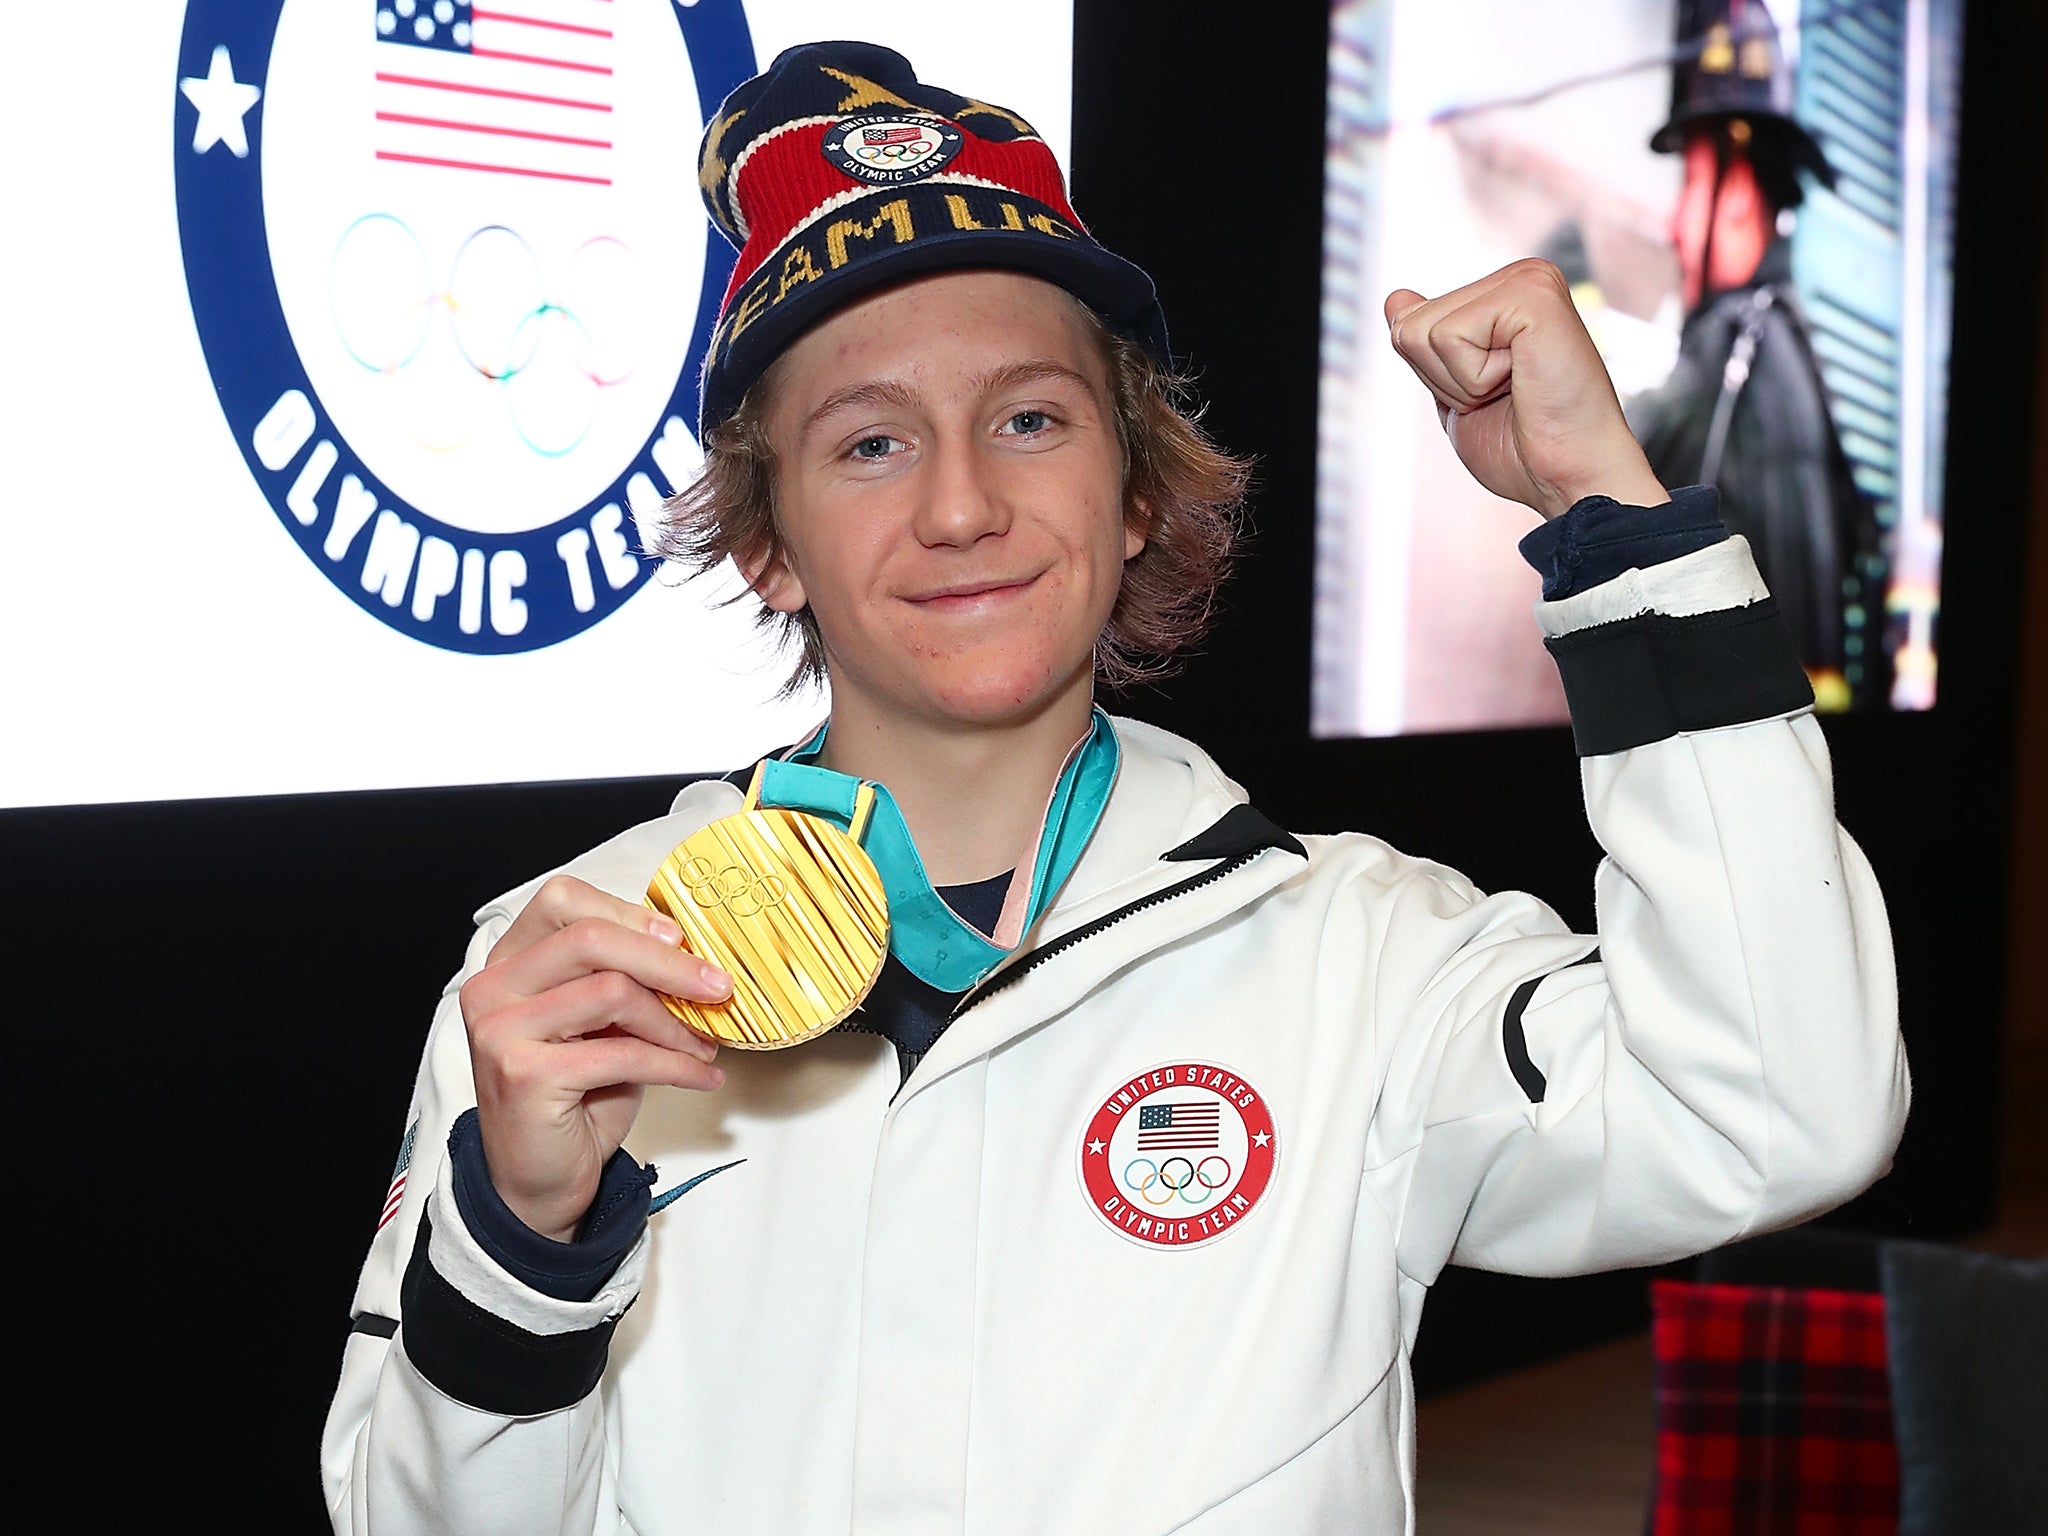 Gerard became the youngest American Winter Olympics gold medallist since 1928